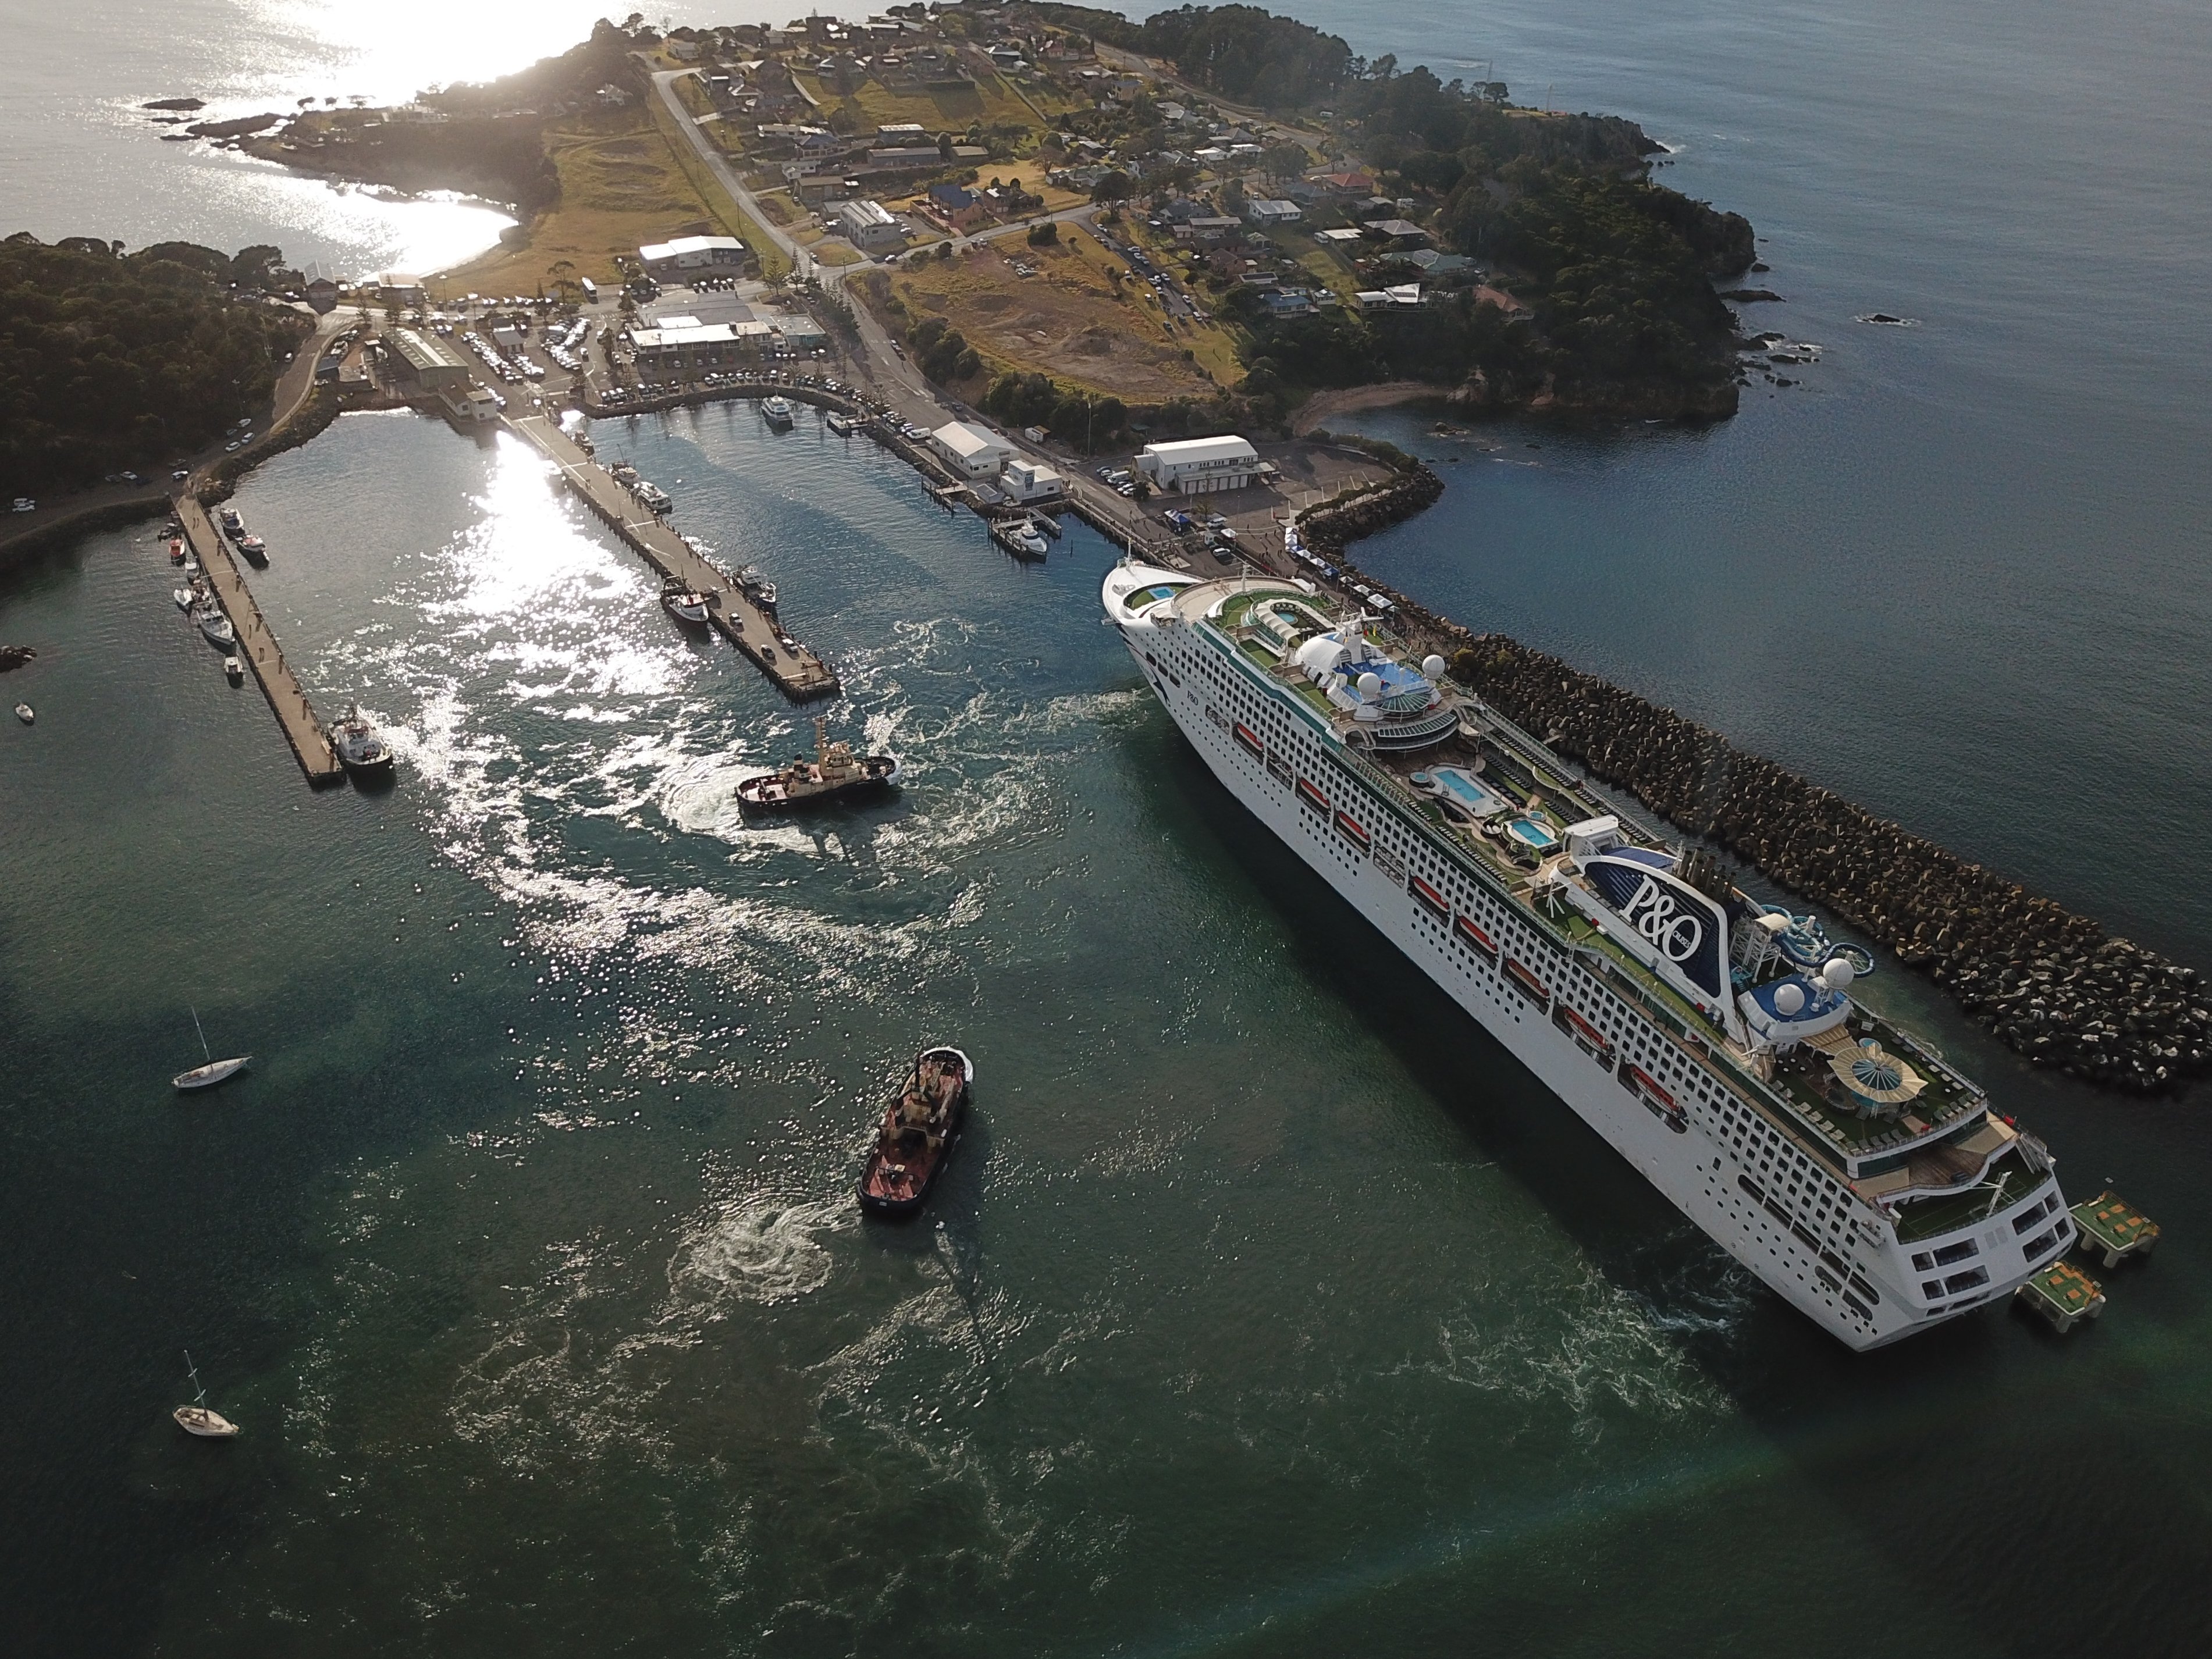 Pacific Explorer - Eden's first cruise ship to tie up at new wharf